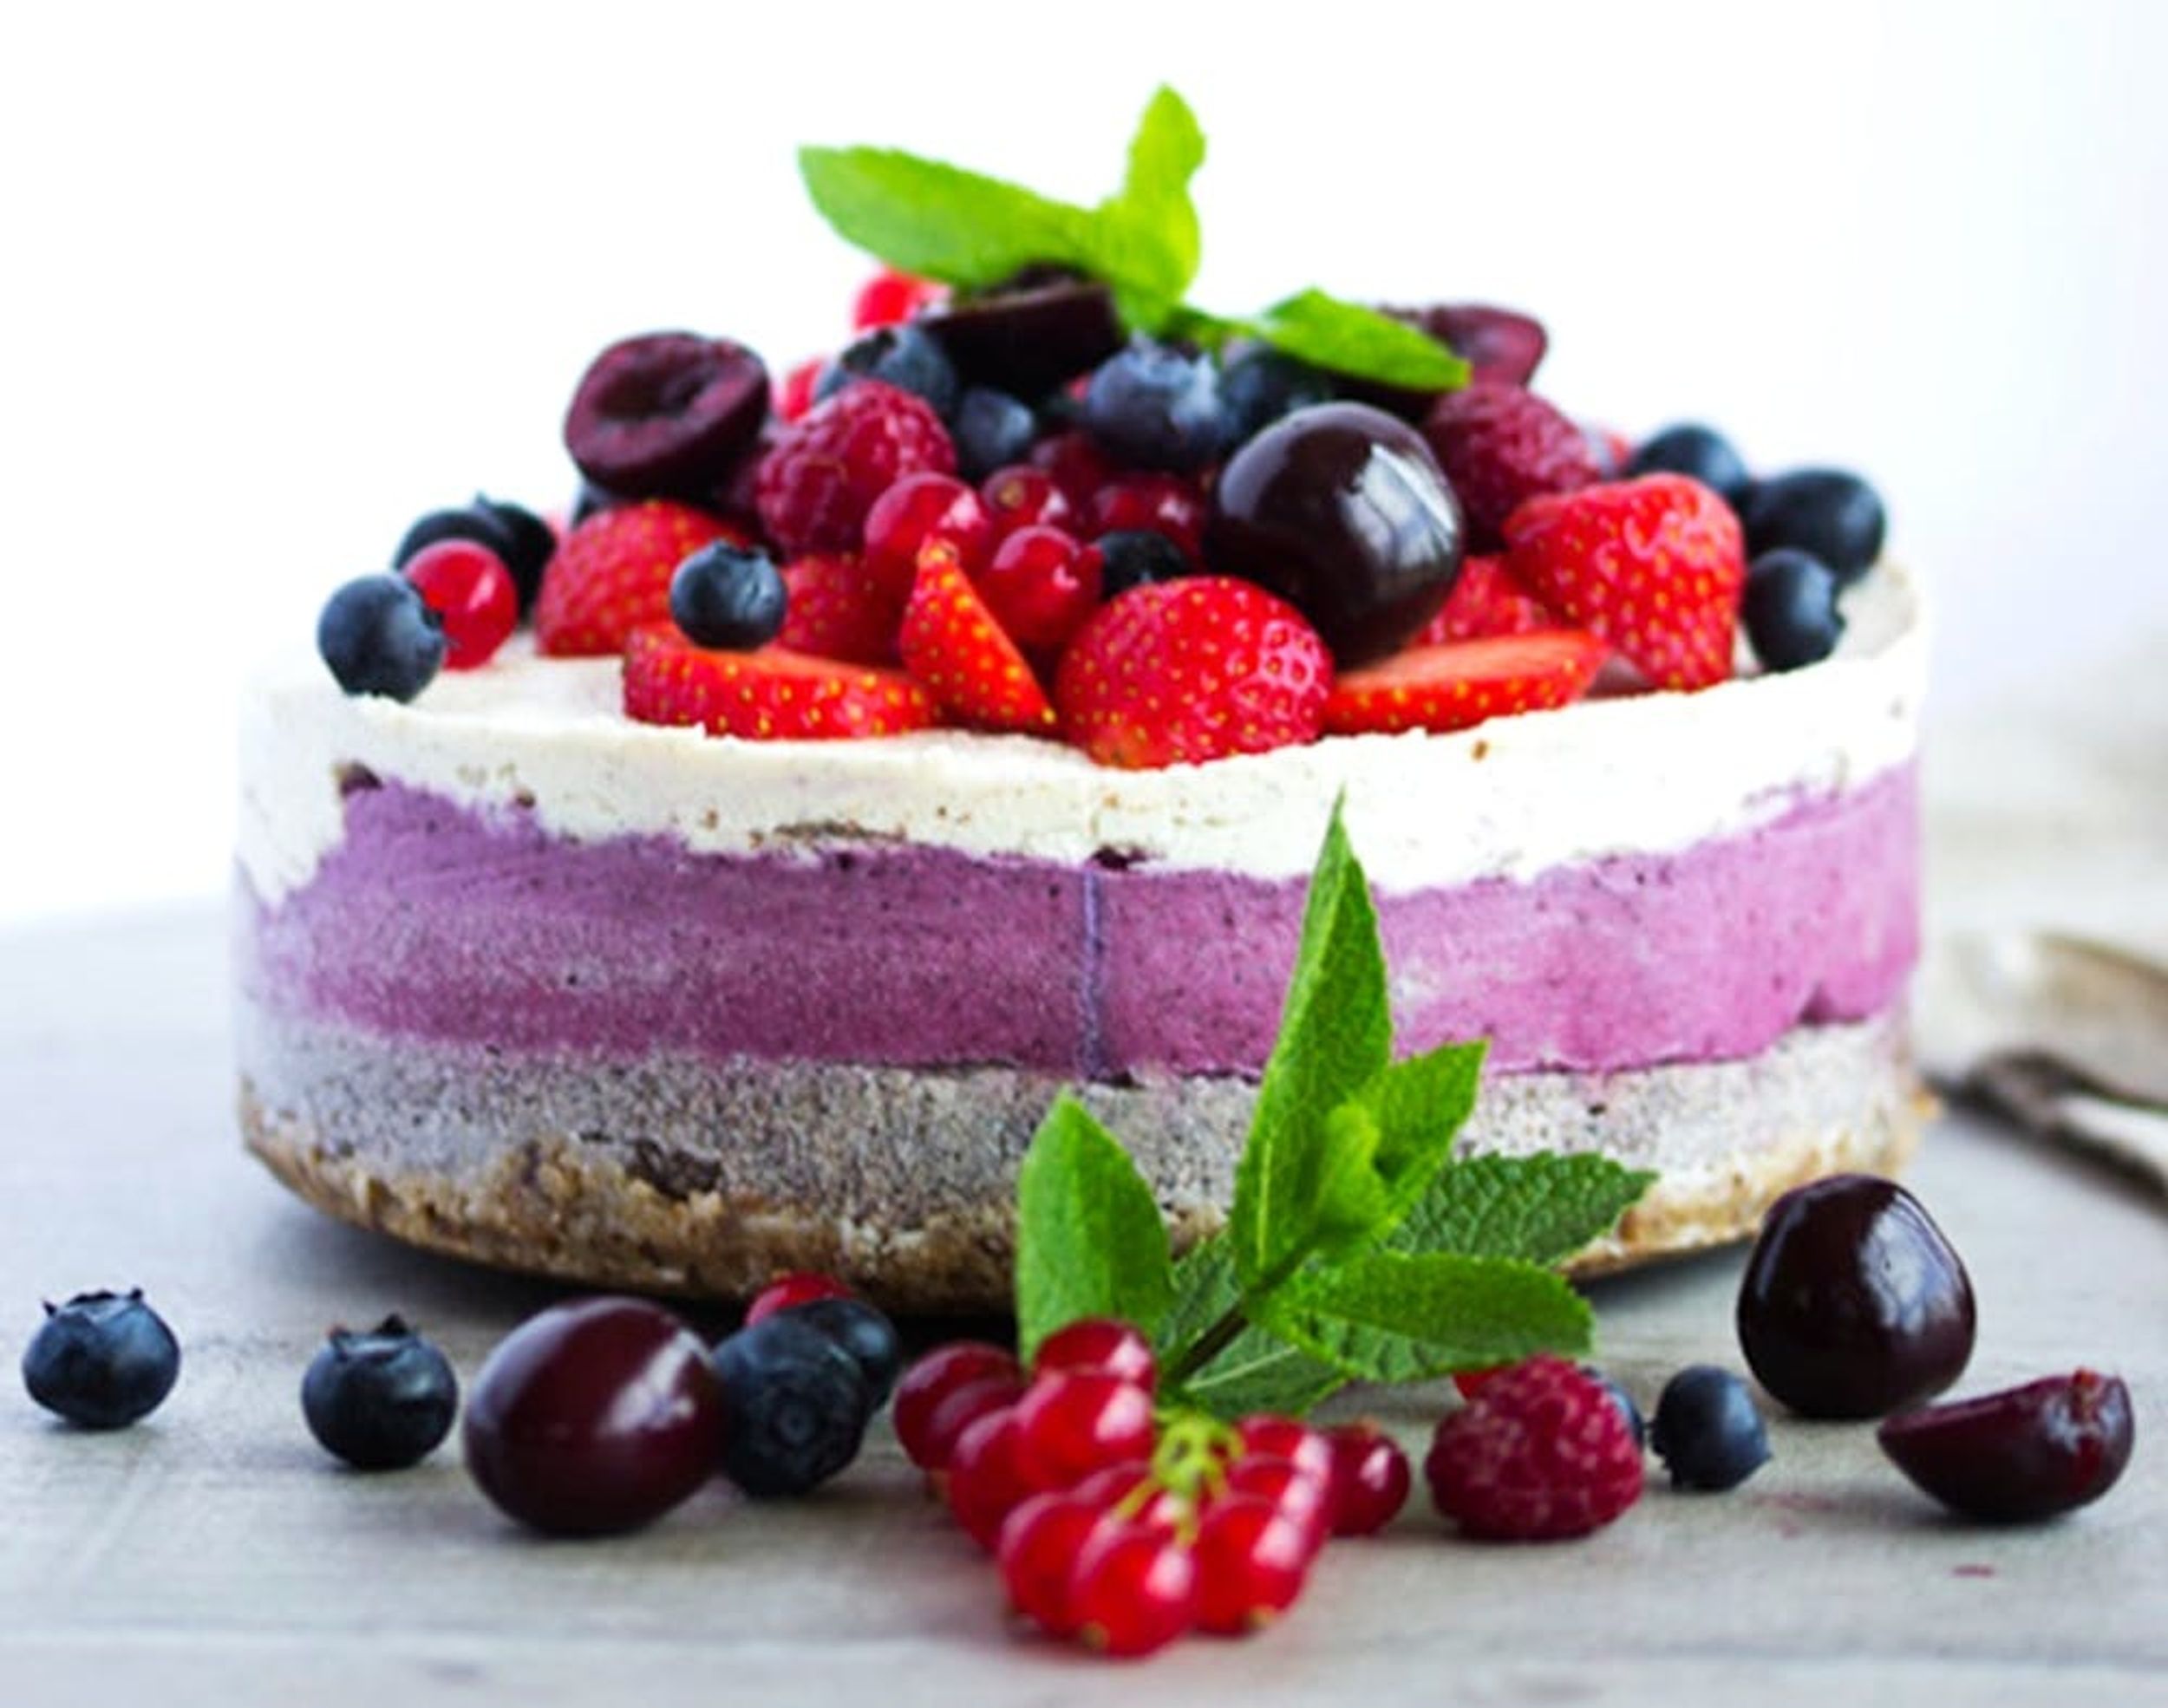 15 Gluten-Free Desserts to Satisfy Your Sweet Tooth